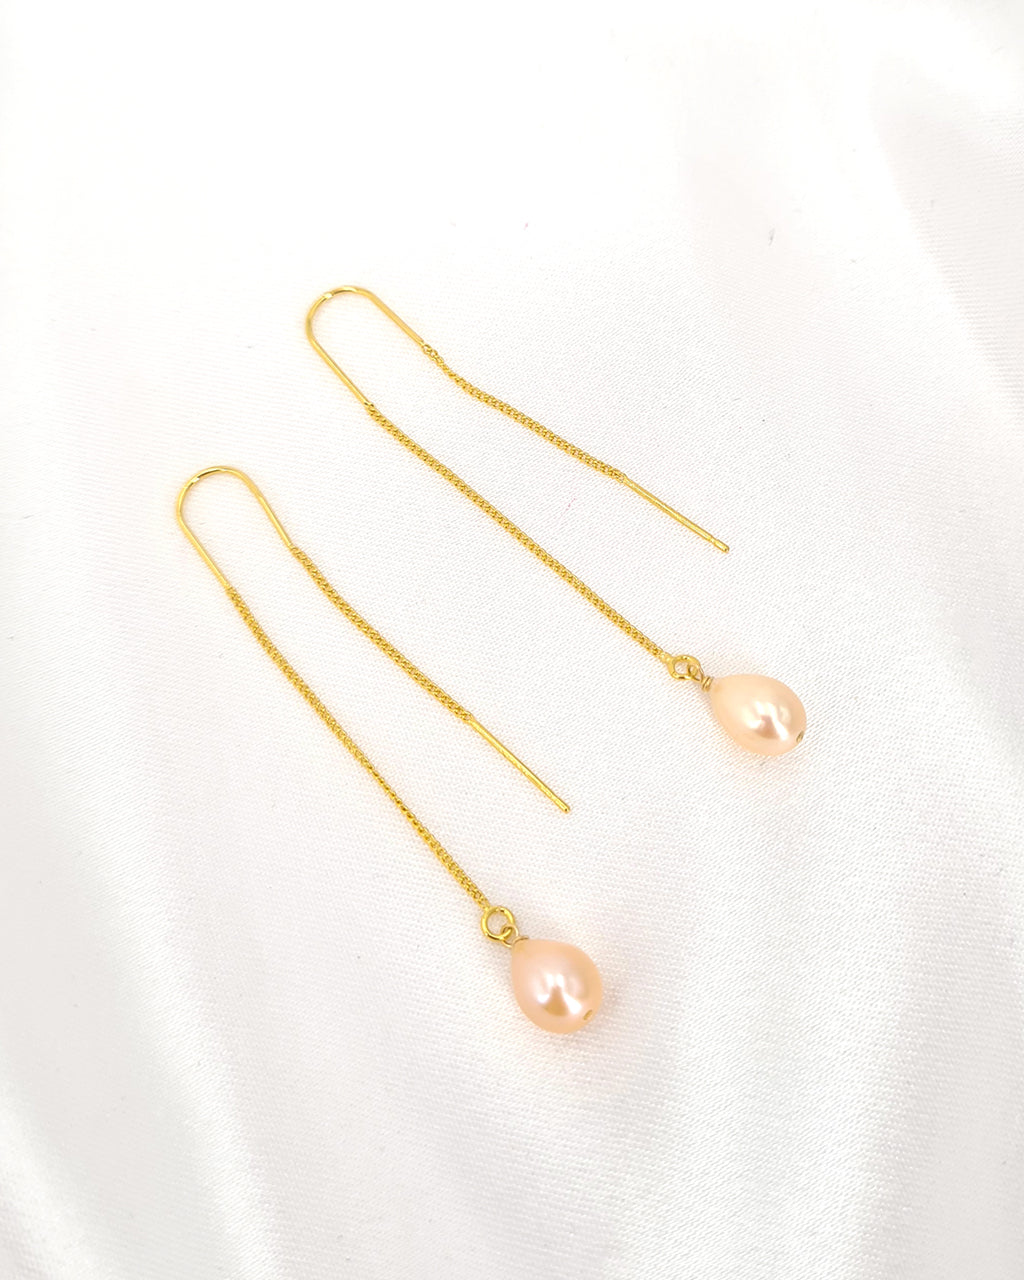 Gold Vermeil Threader Earrings with Teardrop Pearl | Timeless Pearl Jewelry for Wedding and Everyday